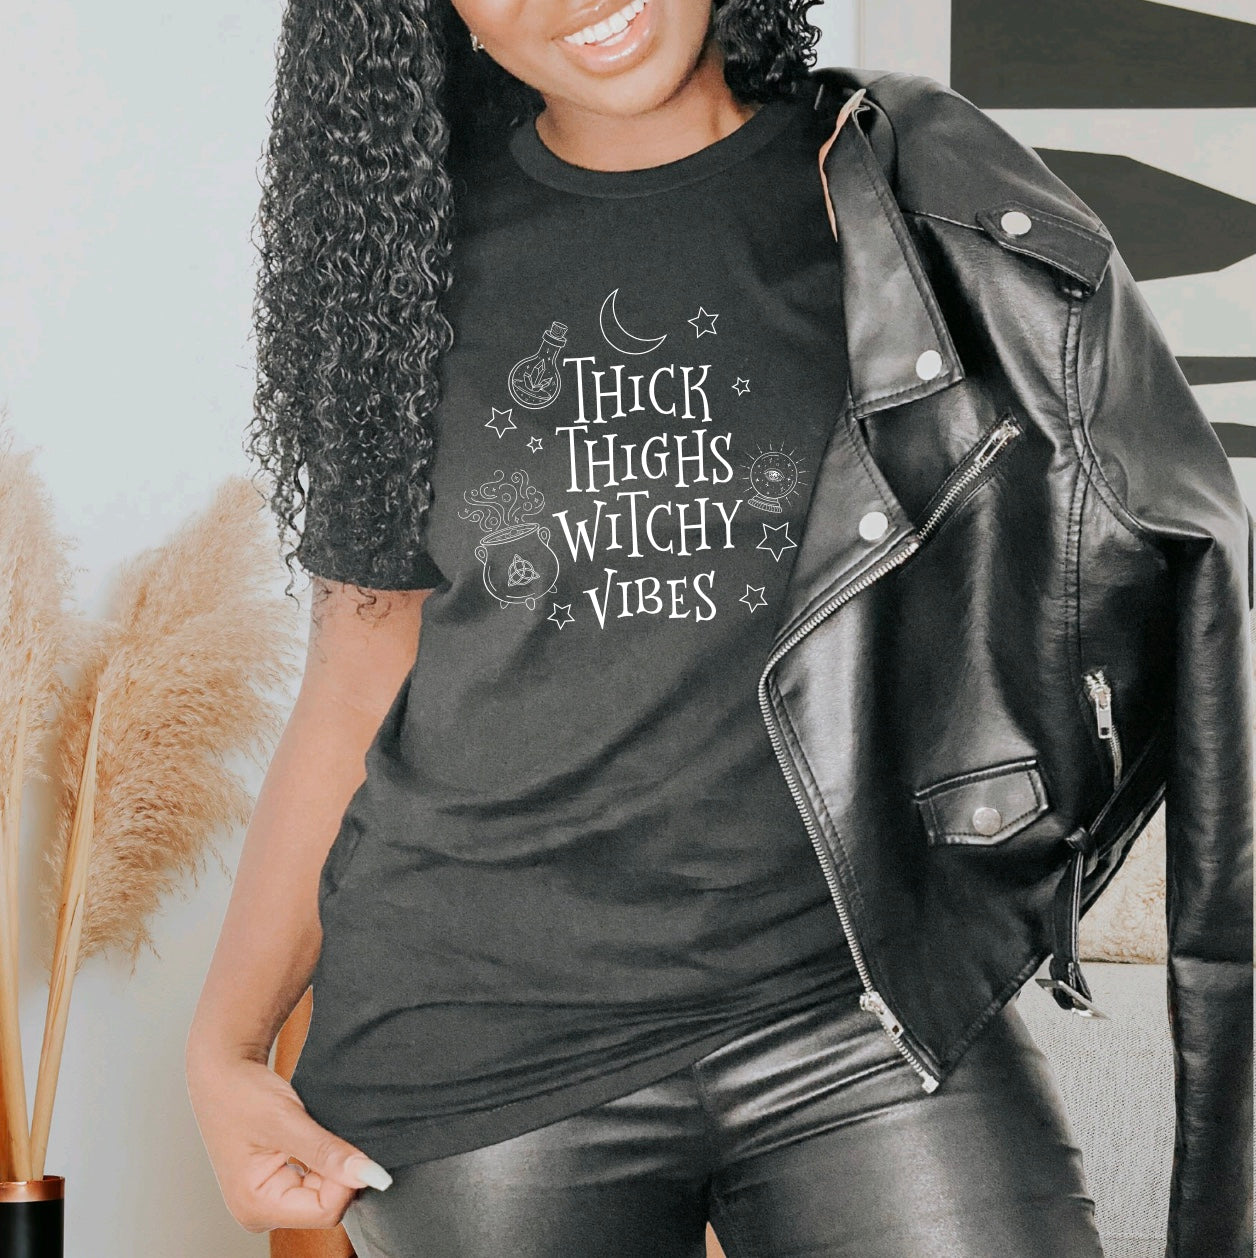 Thick Thighs Witchy Vibes Crew Neck Black T-shirt